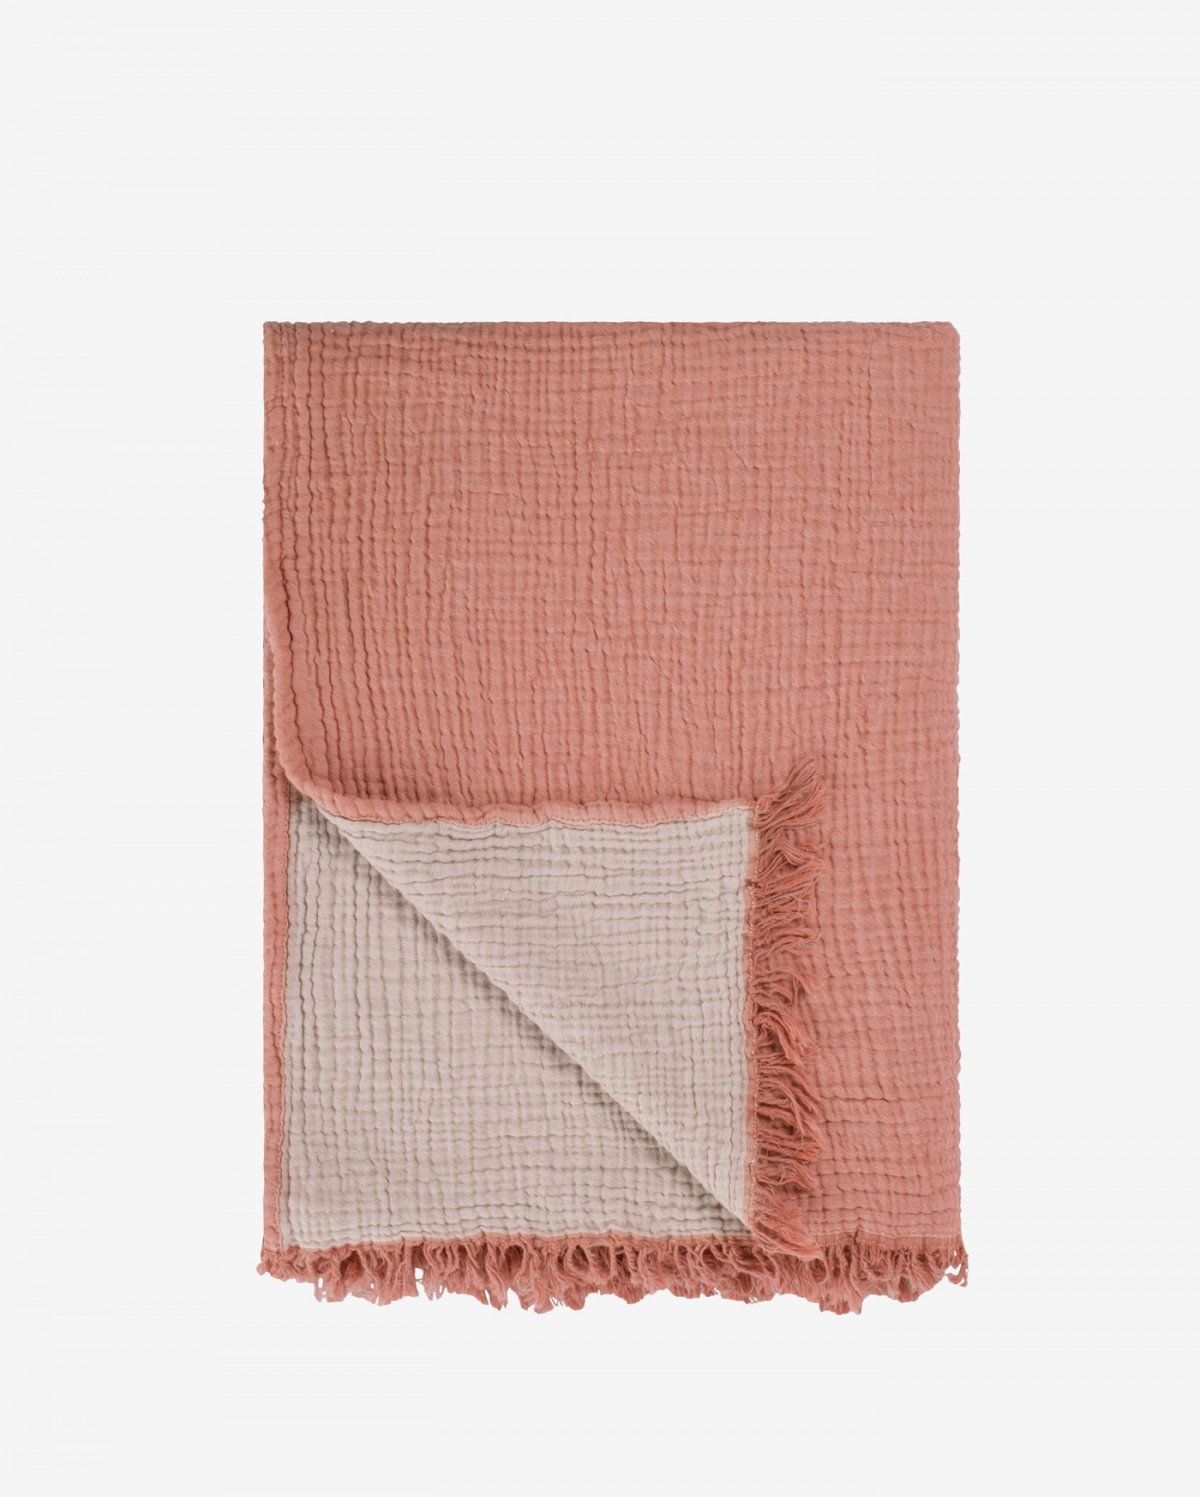 Cocoon Muslin Cotton Throw - Apricot & Ginger Snap